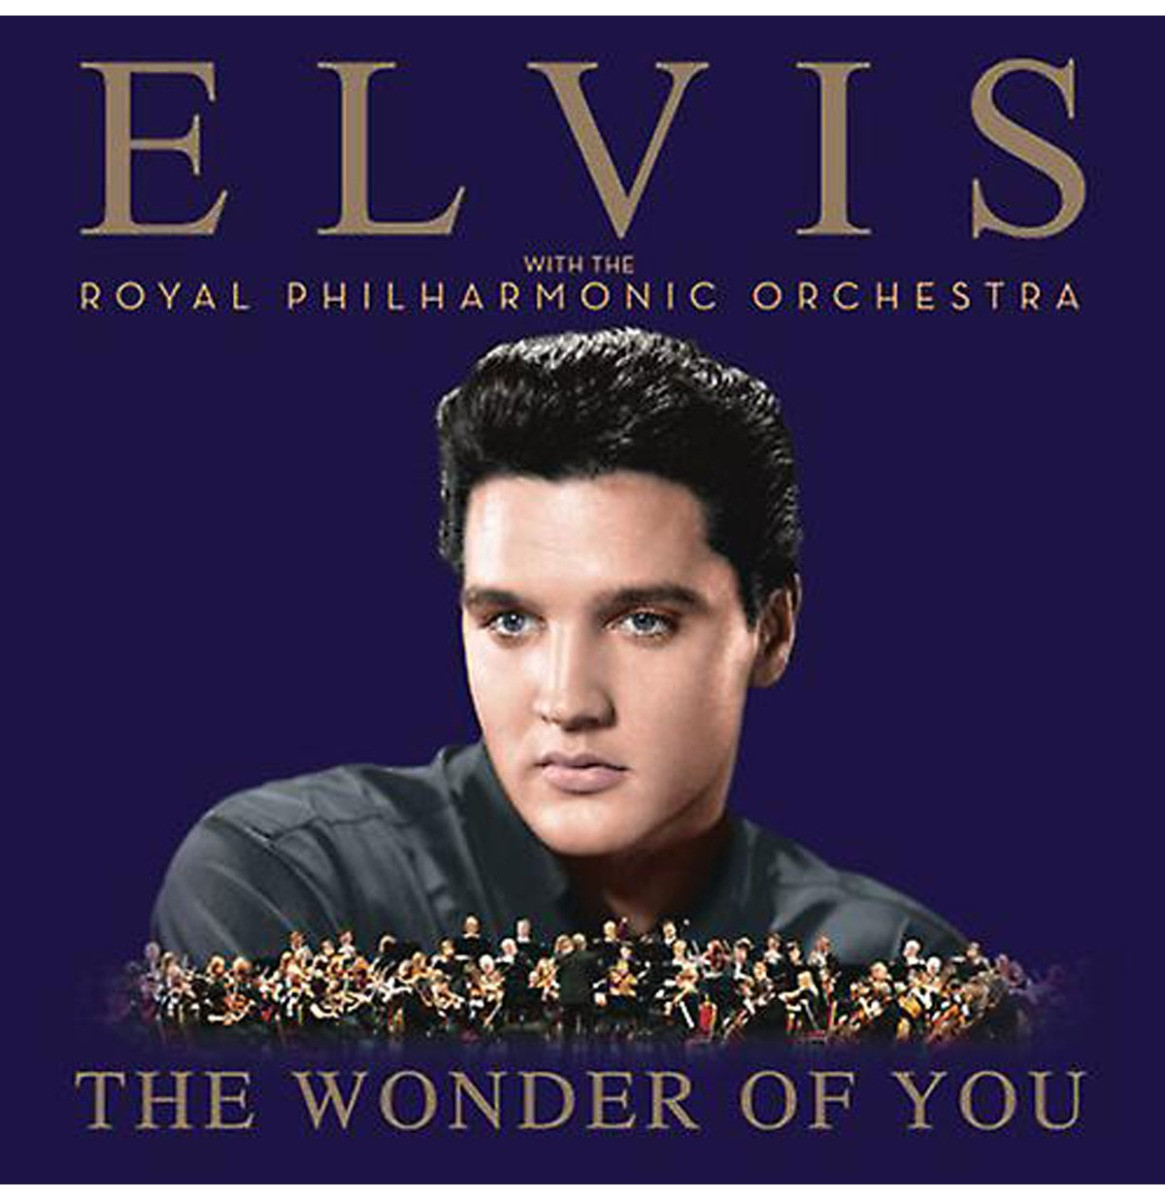 Elvis Presley With The Royal Philharmonic Orchestra - The Wonder Of You 2LP